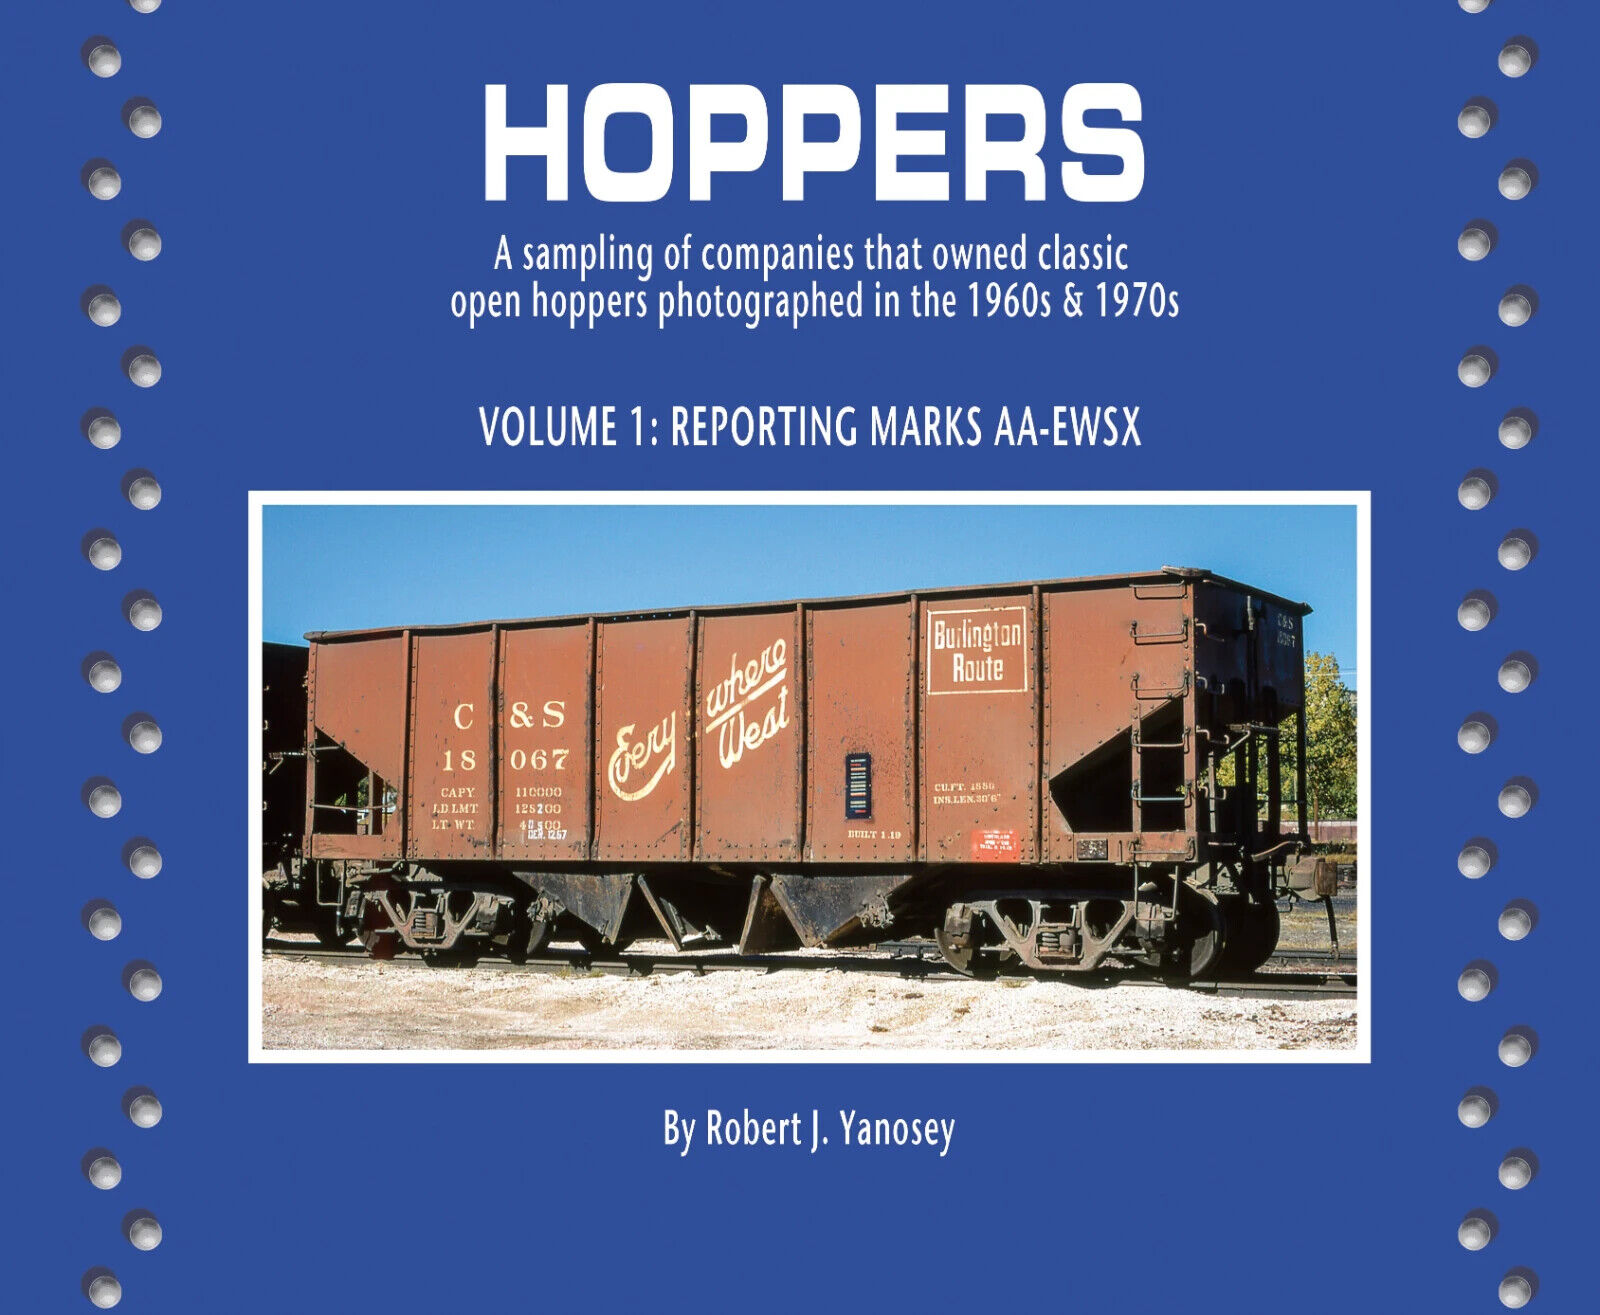 HOPPERS in the 1960s & 1970s, Vol. 1: Reporting Marks AA-EWSX (BRAND NEW BOOK)